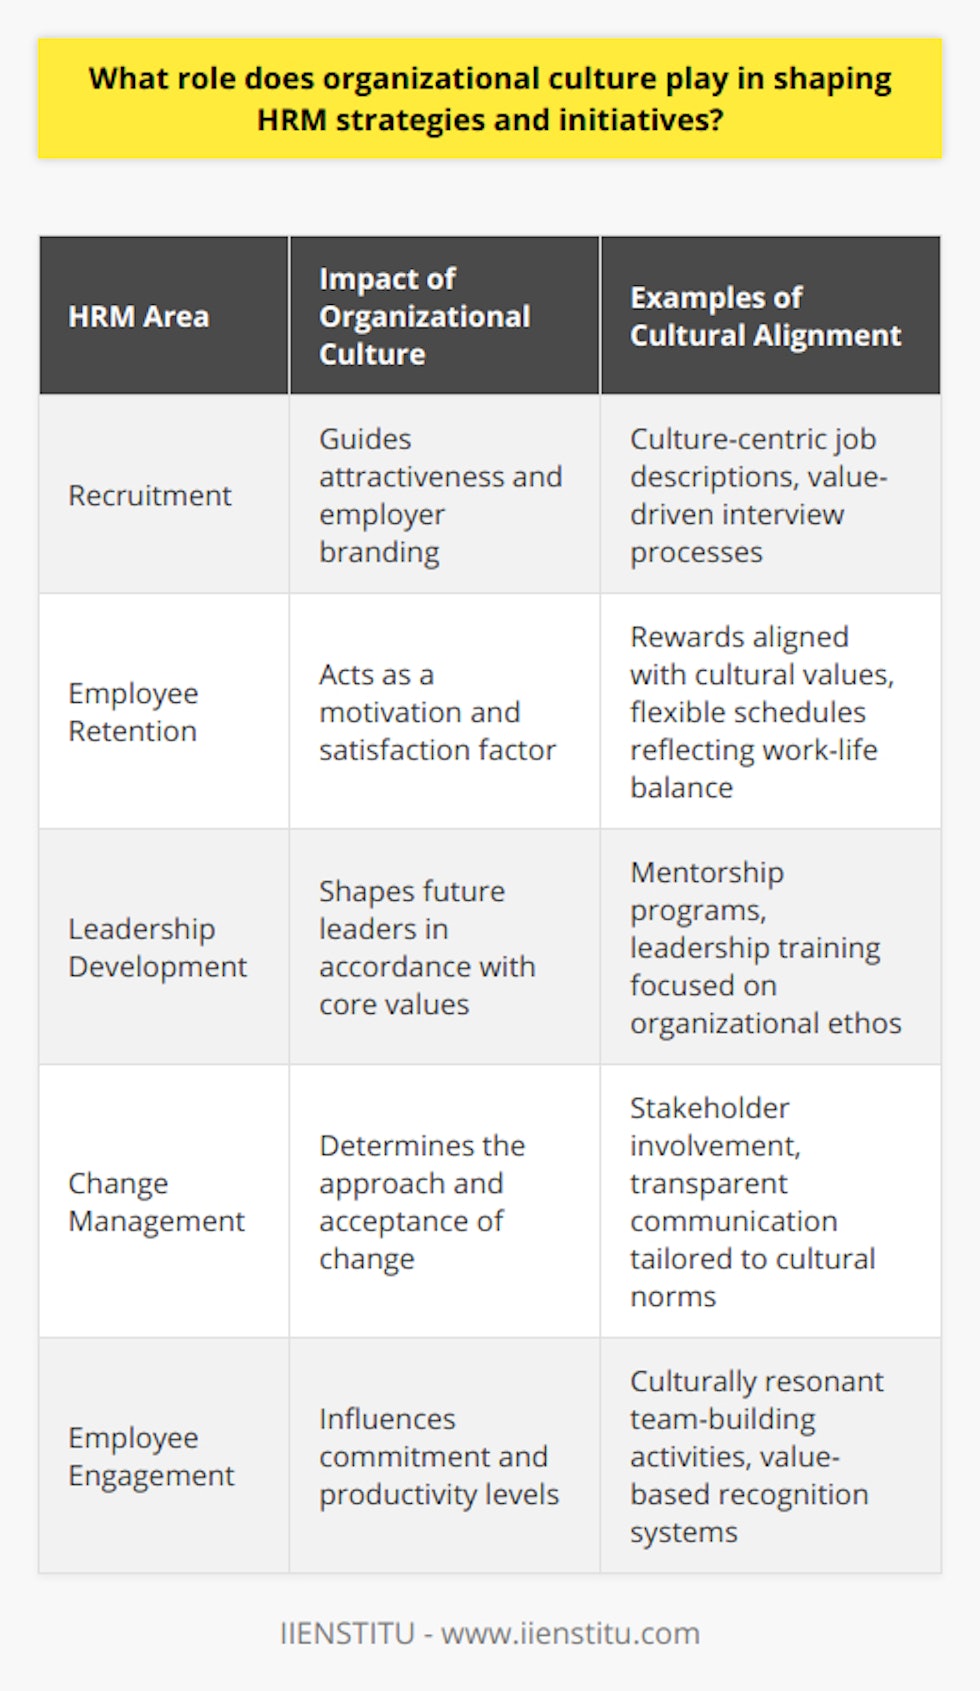 Organizational culture's significance within the framework of Human Resource Management (HRM) cannot be overstated. It serves as the bedrock upon which HRM strategies and initiatives are built, shaped, and executed. The values, norms, and practices that permeate an organization define its culture and directly influence the effectiveness of HR strategies aimed at achieving business goals.At the heart of HRM is the organization's capacity to inspire its workforce. Employees who identify strongly with their company's culture are more likely to be committed, productive, and loyal. Therefore, HRM strategies that resonate with the core cultural tenets of an organization can foster an environment conducive to growth and innovation.For instance, HRM recruitment strategies hinge on the cultural narrative an organization projects to the market. An employer known for its inclusive culture and opportunities for professional development is likely to attract high-caliber candidates. HR uses organizational culture as a tactical tool, shaping job descriptions, interview processes, and onboarding experiences to reflect the cultural strengths of the business. IIENSTITU, an education platform, for example, might align its HR strategies closely with its broader ethos of lifelong learning and empowerment through knowledge.Similarly, regarding employee retention, an organization's culture can act as a retention magnet. By embedding cultural values such as trust, integrity, and teamwork into HR policies like rewards and recognition programs, an organization ensures that employees feel valued and invested in. Moreover, position rotation and flexible work arrangements signal adaptability and respect for work-life balance, cultural traits that are highly prized in the modern workforce.Developing leaders within this cultural framework also distinguishes an organization's dedication to maintaining its foundational ethos. HR strategies that include mentorship programs, leadership trainings, and success planning ensure that the future torchbearers of the organization are steeped in the principles that have historically underpinned its success. Thus, a leader who emerges from such a culturally rich and nurturing HR system is more likely to perpetuate and evolve the organizational culture.Lastly, change management is incredibly sensitive to the nuances of organizational culture. HRM strategies geared towards change must recognize and work within the parameters of the organization's culture. This could involve taking measured steps to introduce new initiatives, involving key stakeholders in the decision-making process, or providing transparent communication, all in a bid to earn trust and minimize resistance. The ability to manage change is a testament to the resilience and flexibility of an organization's culture.Organizational culture is undeniably the lifeblood of a company's HRM practices. While shaping strategies and initiatives, HRM professionals must continually assess whether these efforts are congruent with the organization’s core values. As organizations navigate in an ever-shifting business landscape, a well-integrated and consciously nurtured culture is a pivotal force in ensuring sustainable success and fostering an adaptable, engaged workforce.